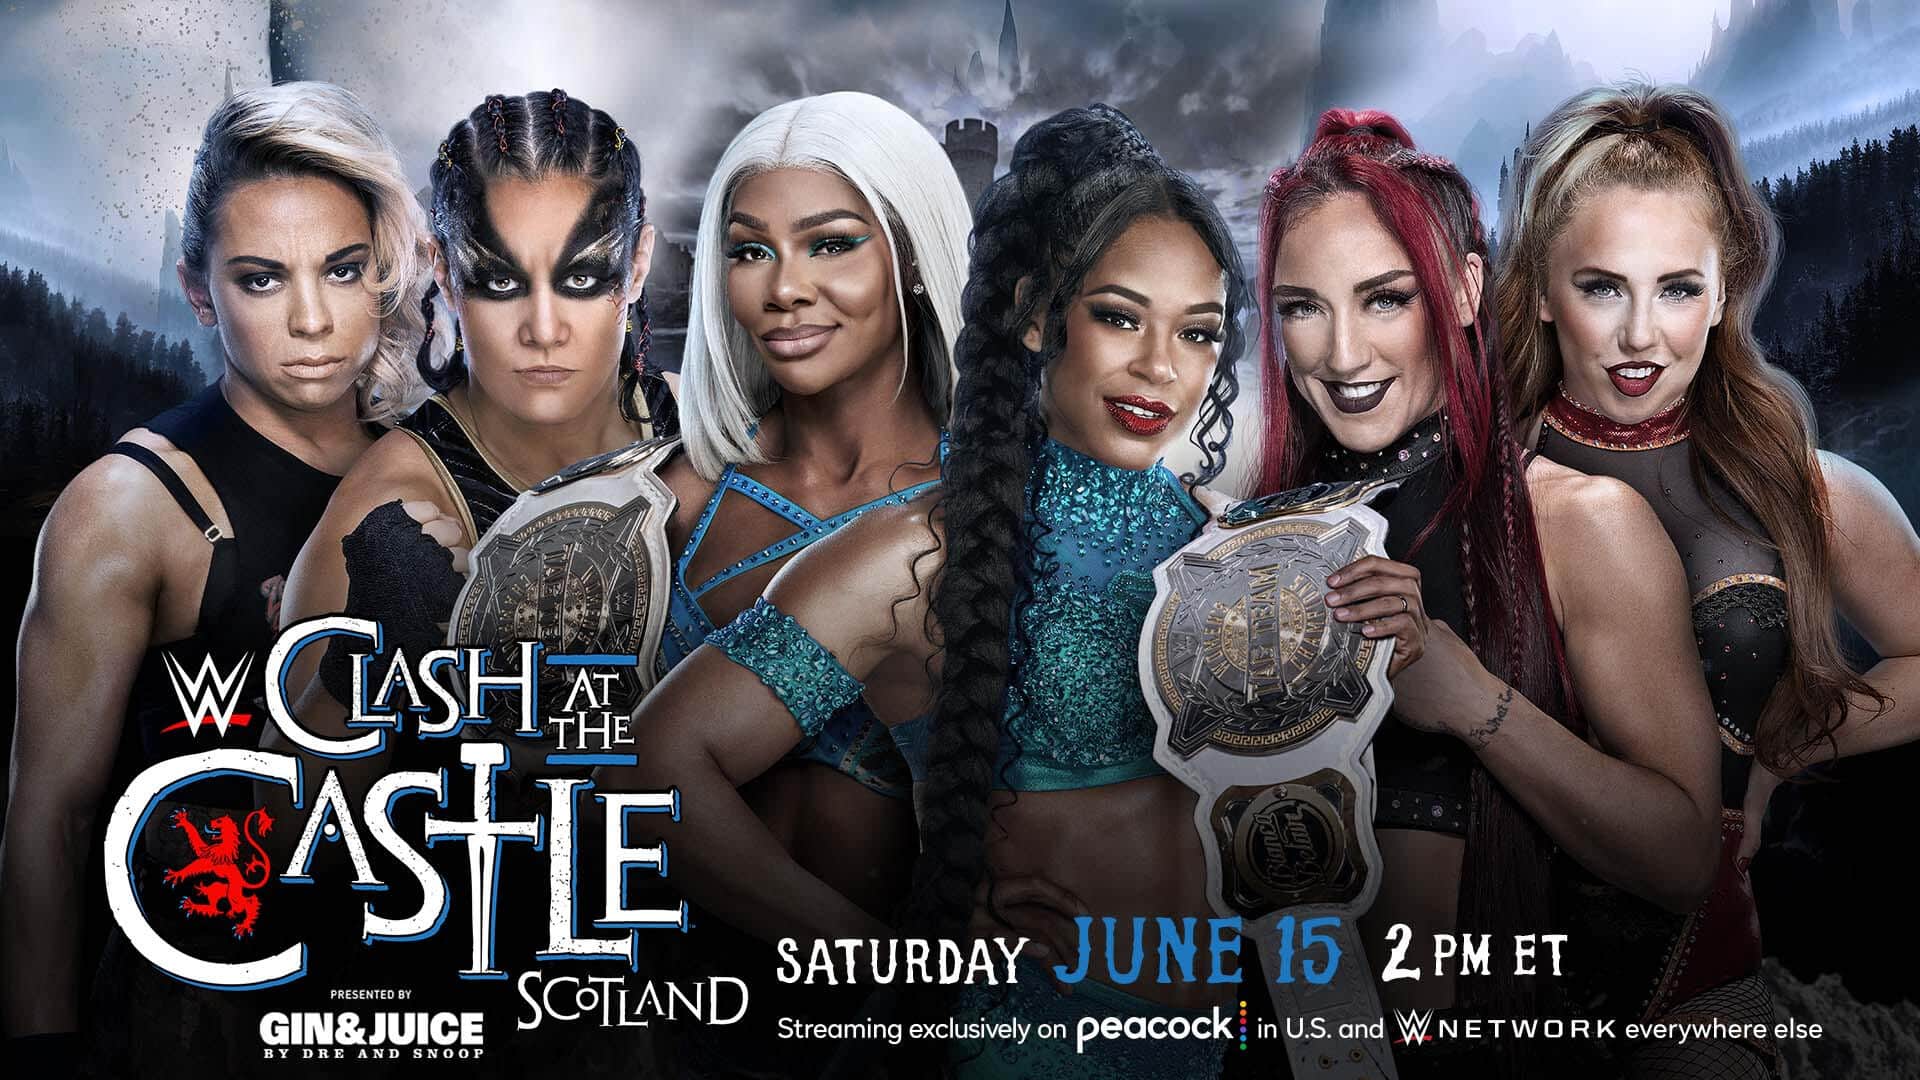 The roster for the WWE SmackDown event and adjustments to the WWE Clash At the Castle: Scotland Card have been declared.